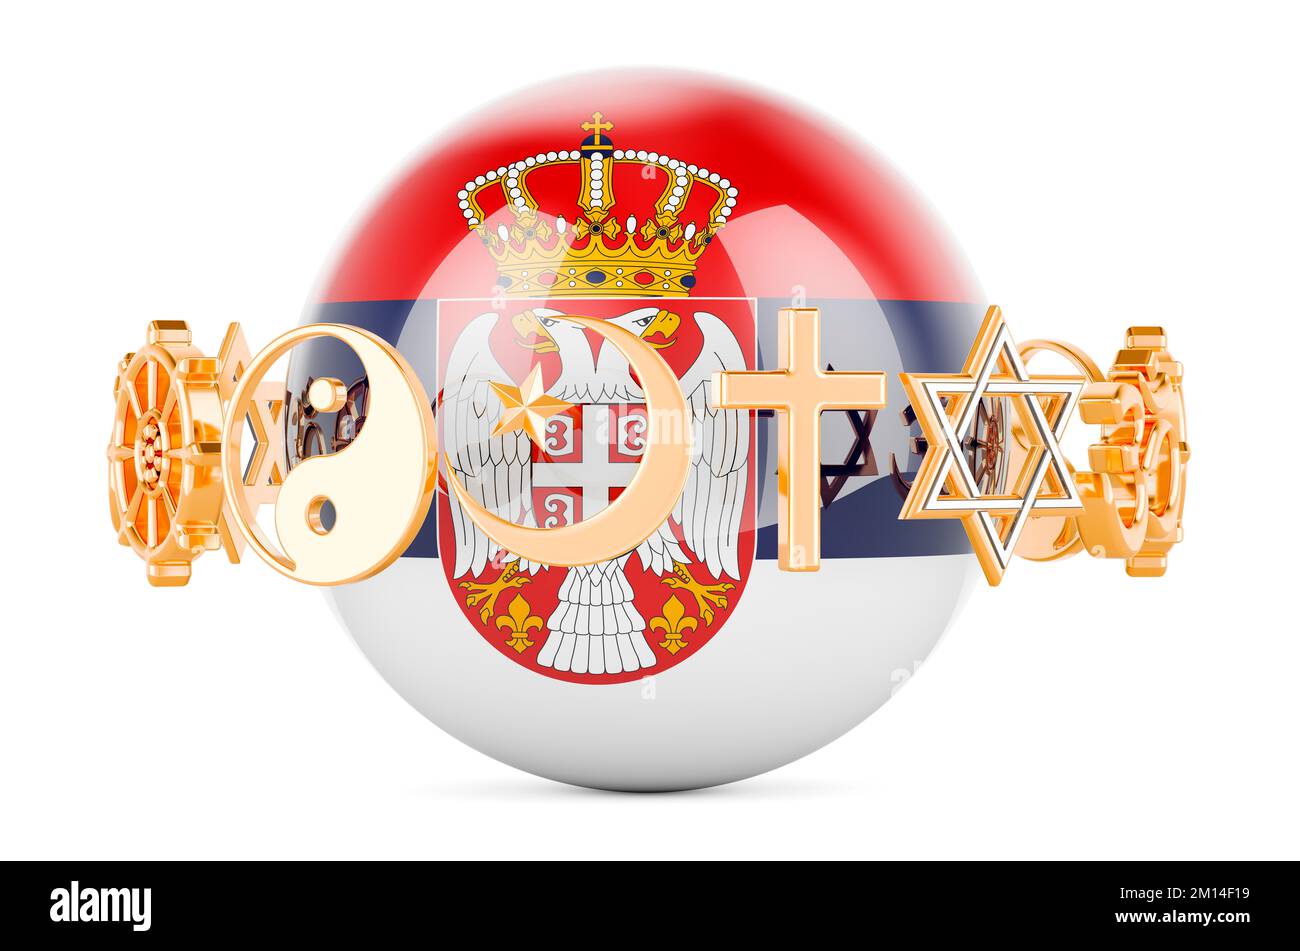 Serbian flag painted on sphere with religions symbols around, 3D rendering isolated on white background Stock Photo